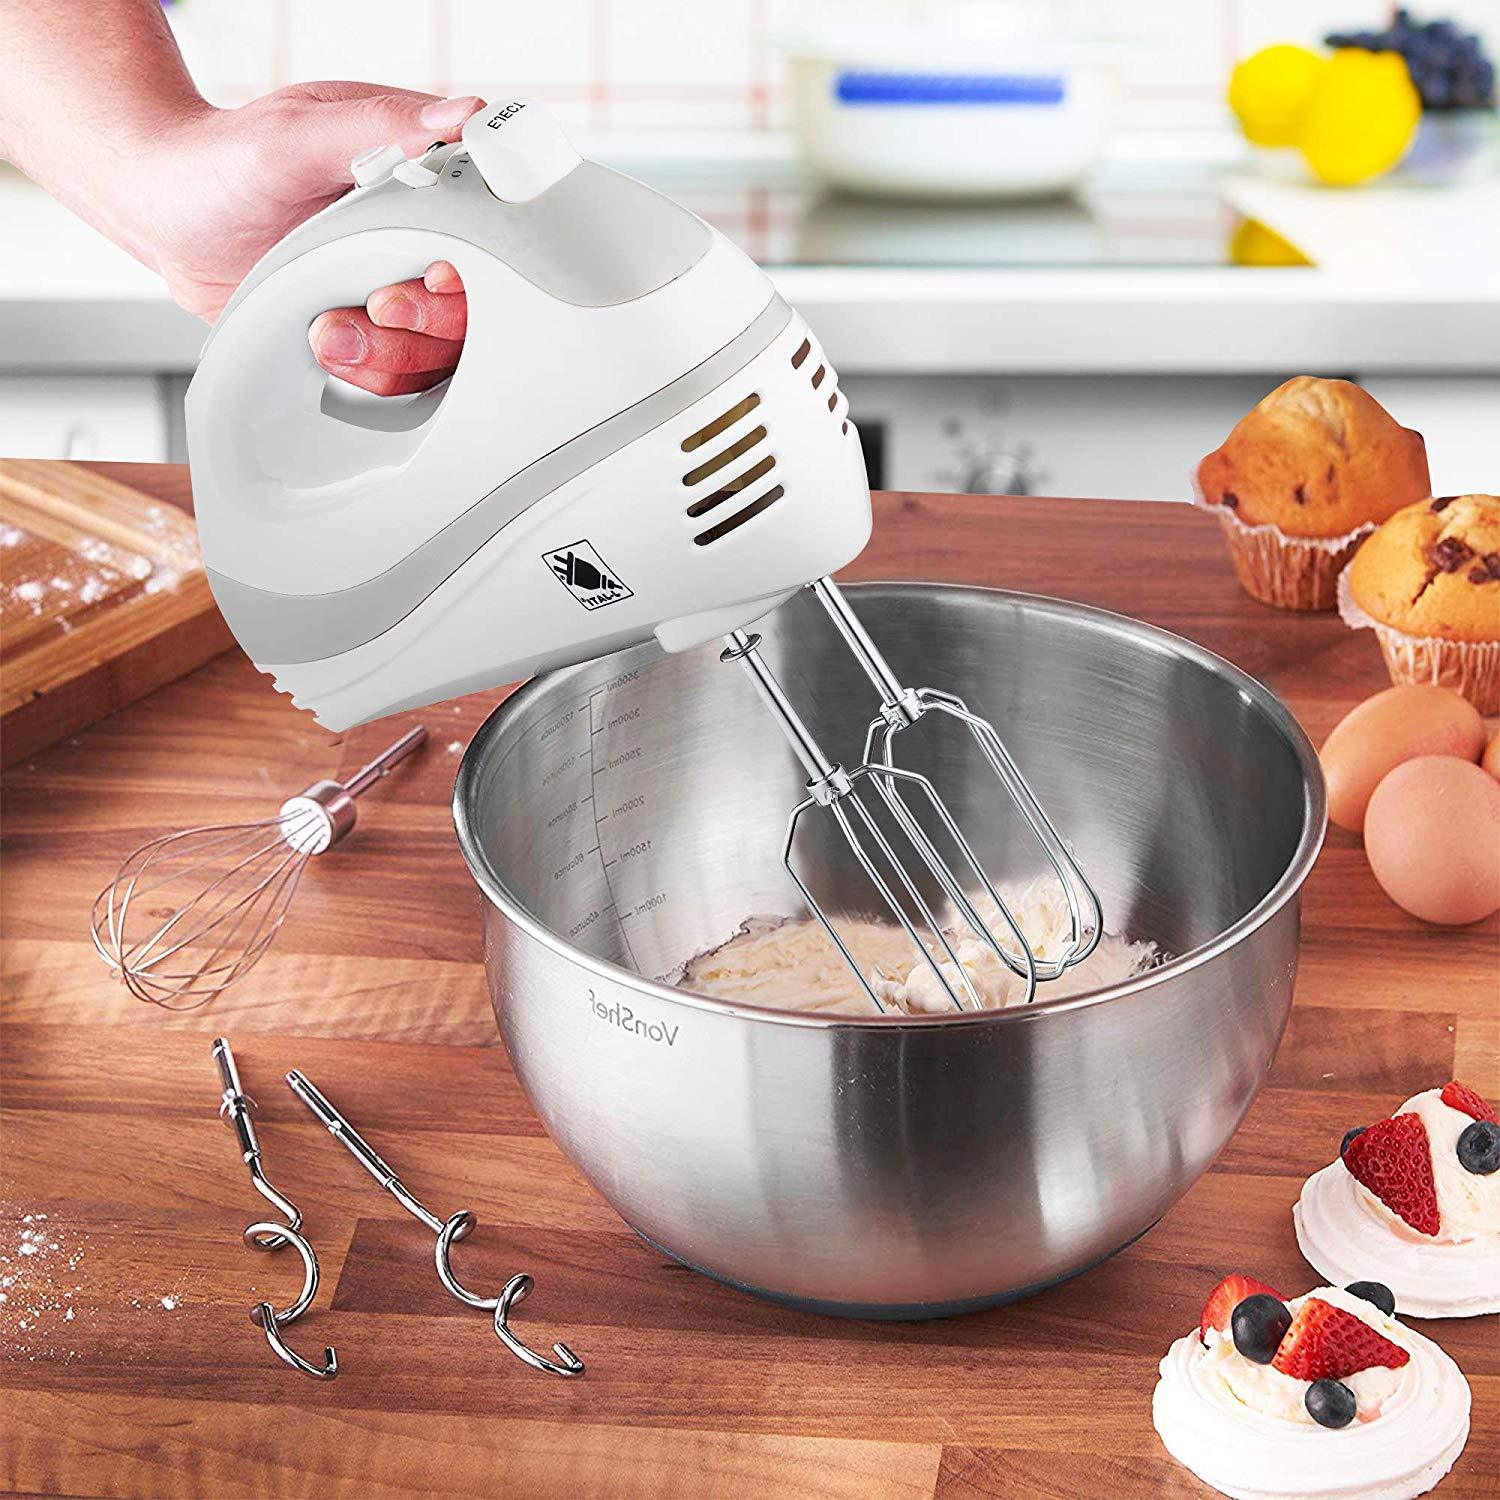 Buy MIRARIYA Beater Blender for Cake Baking Electric Hand Mixer High Speeds  Roasting Appliances Cream 7 Speed Mixer Kitchen Baking Tools- Free Spatula  and Oil Brush Online at Low Prices in India -